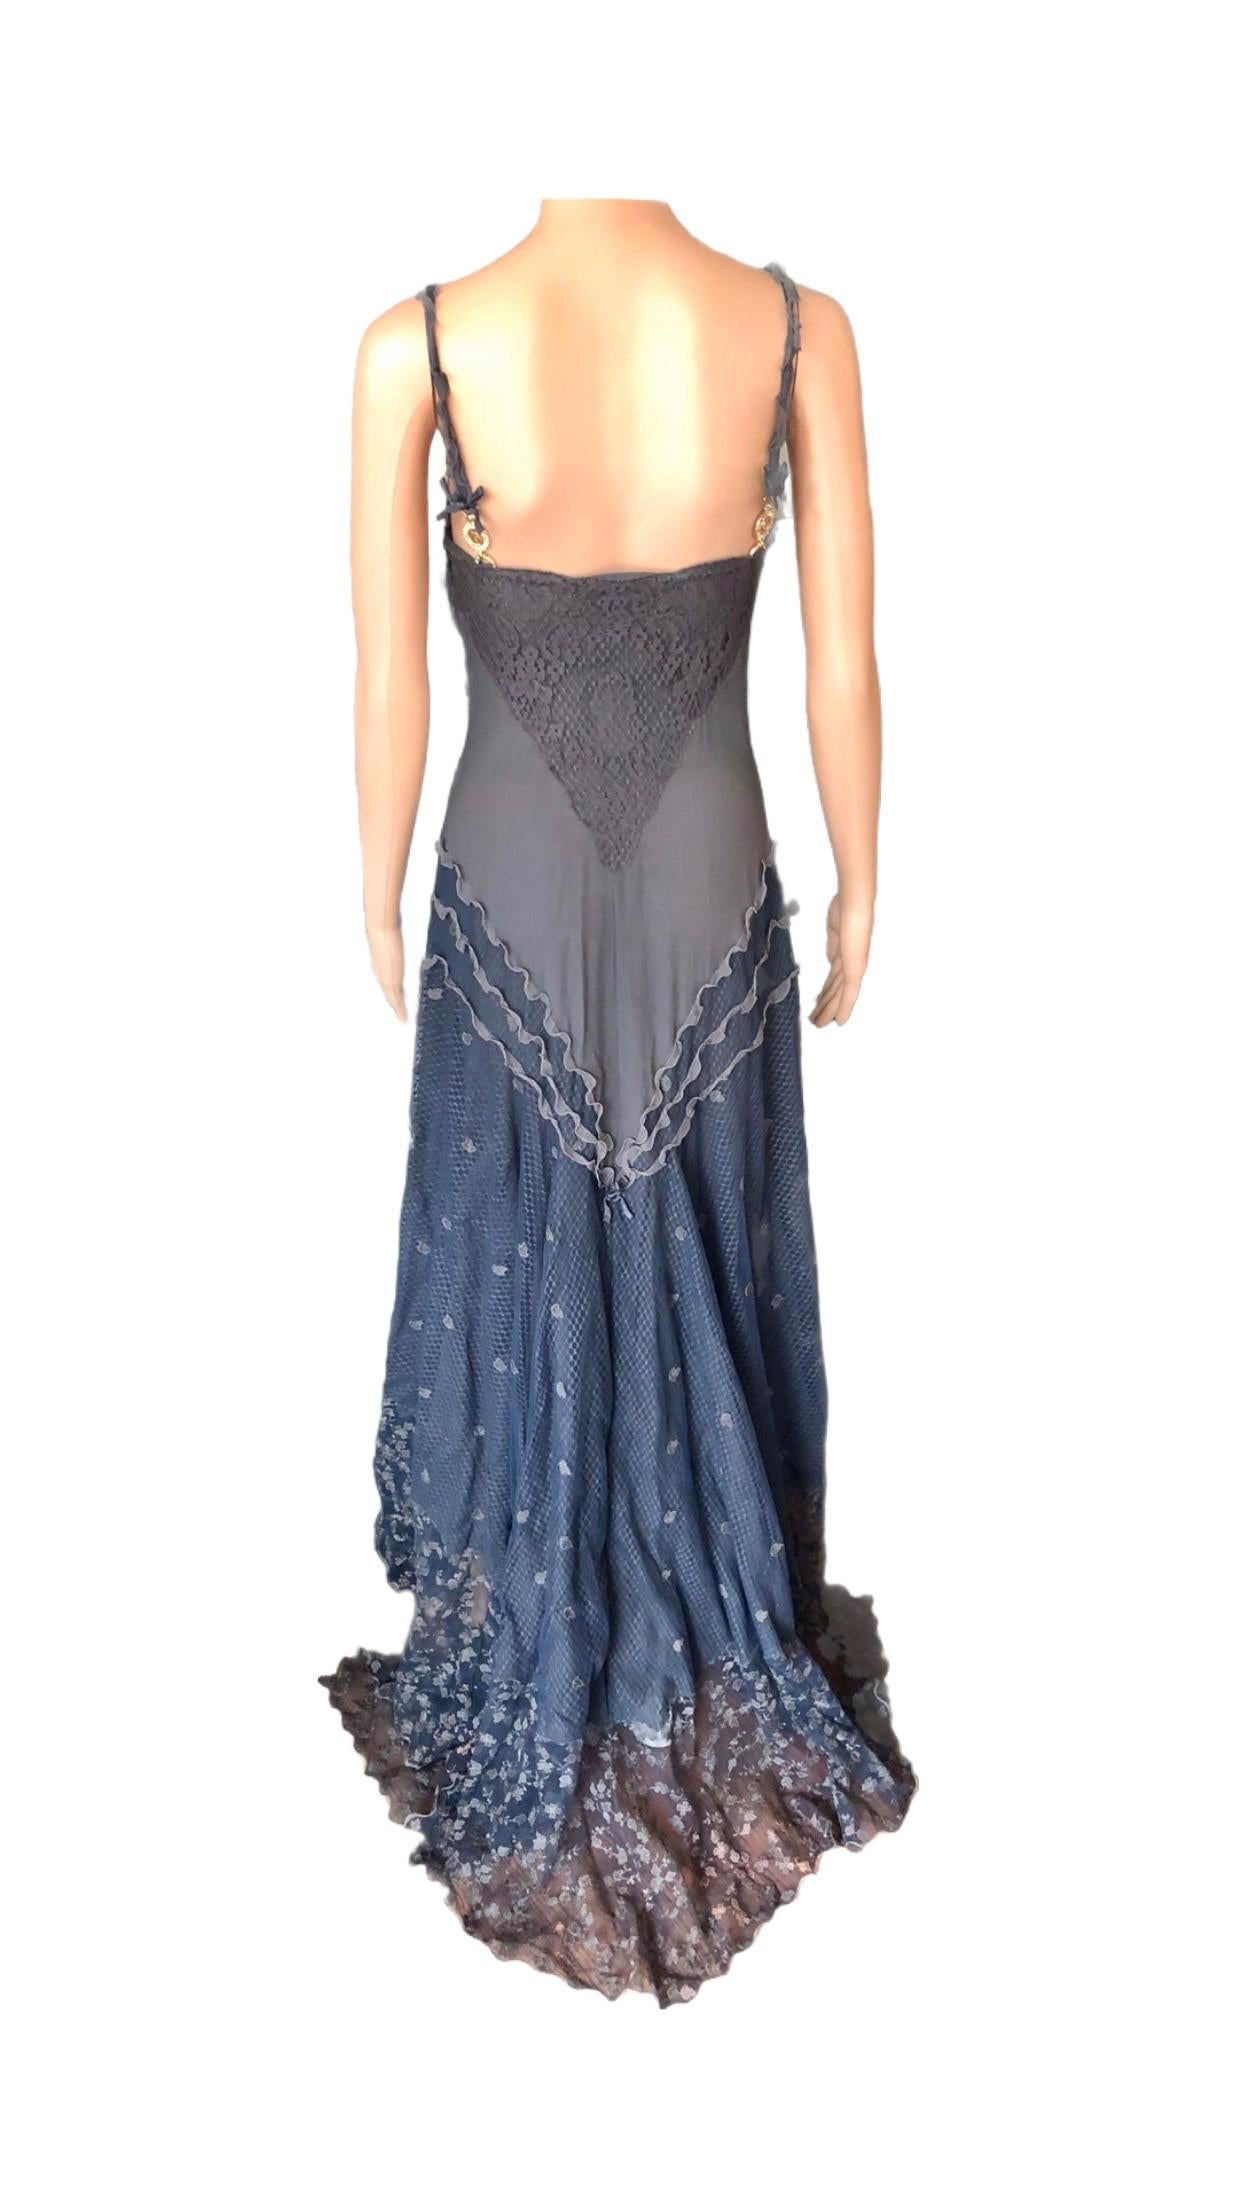 Gianni Versace S/S 1997 Runway Sheer Lace Panels Grey Evening Dress Gown For Sale 10